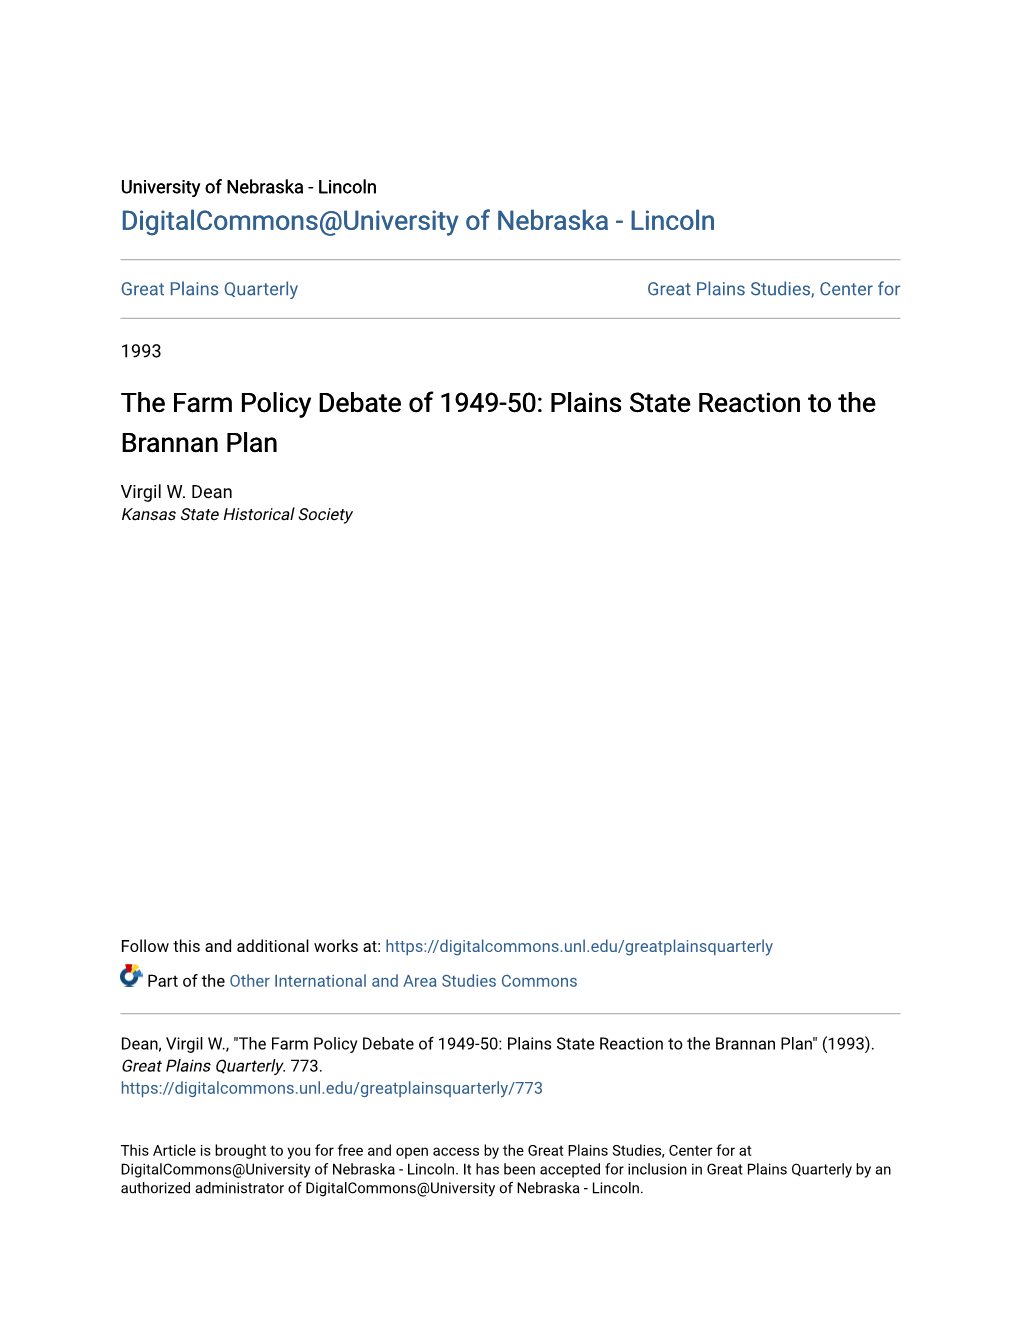 The Farm Policy Debate of 1949-50: Plains State Reaction to the Brannan Plan